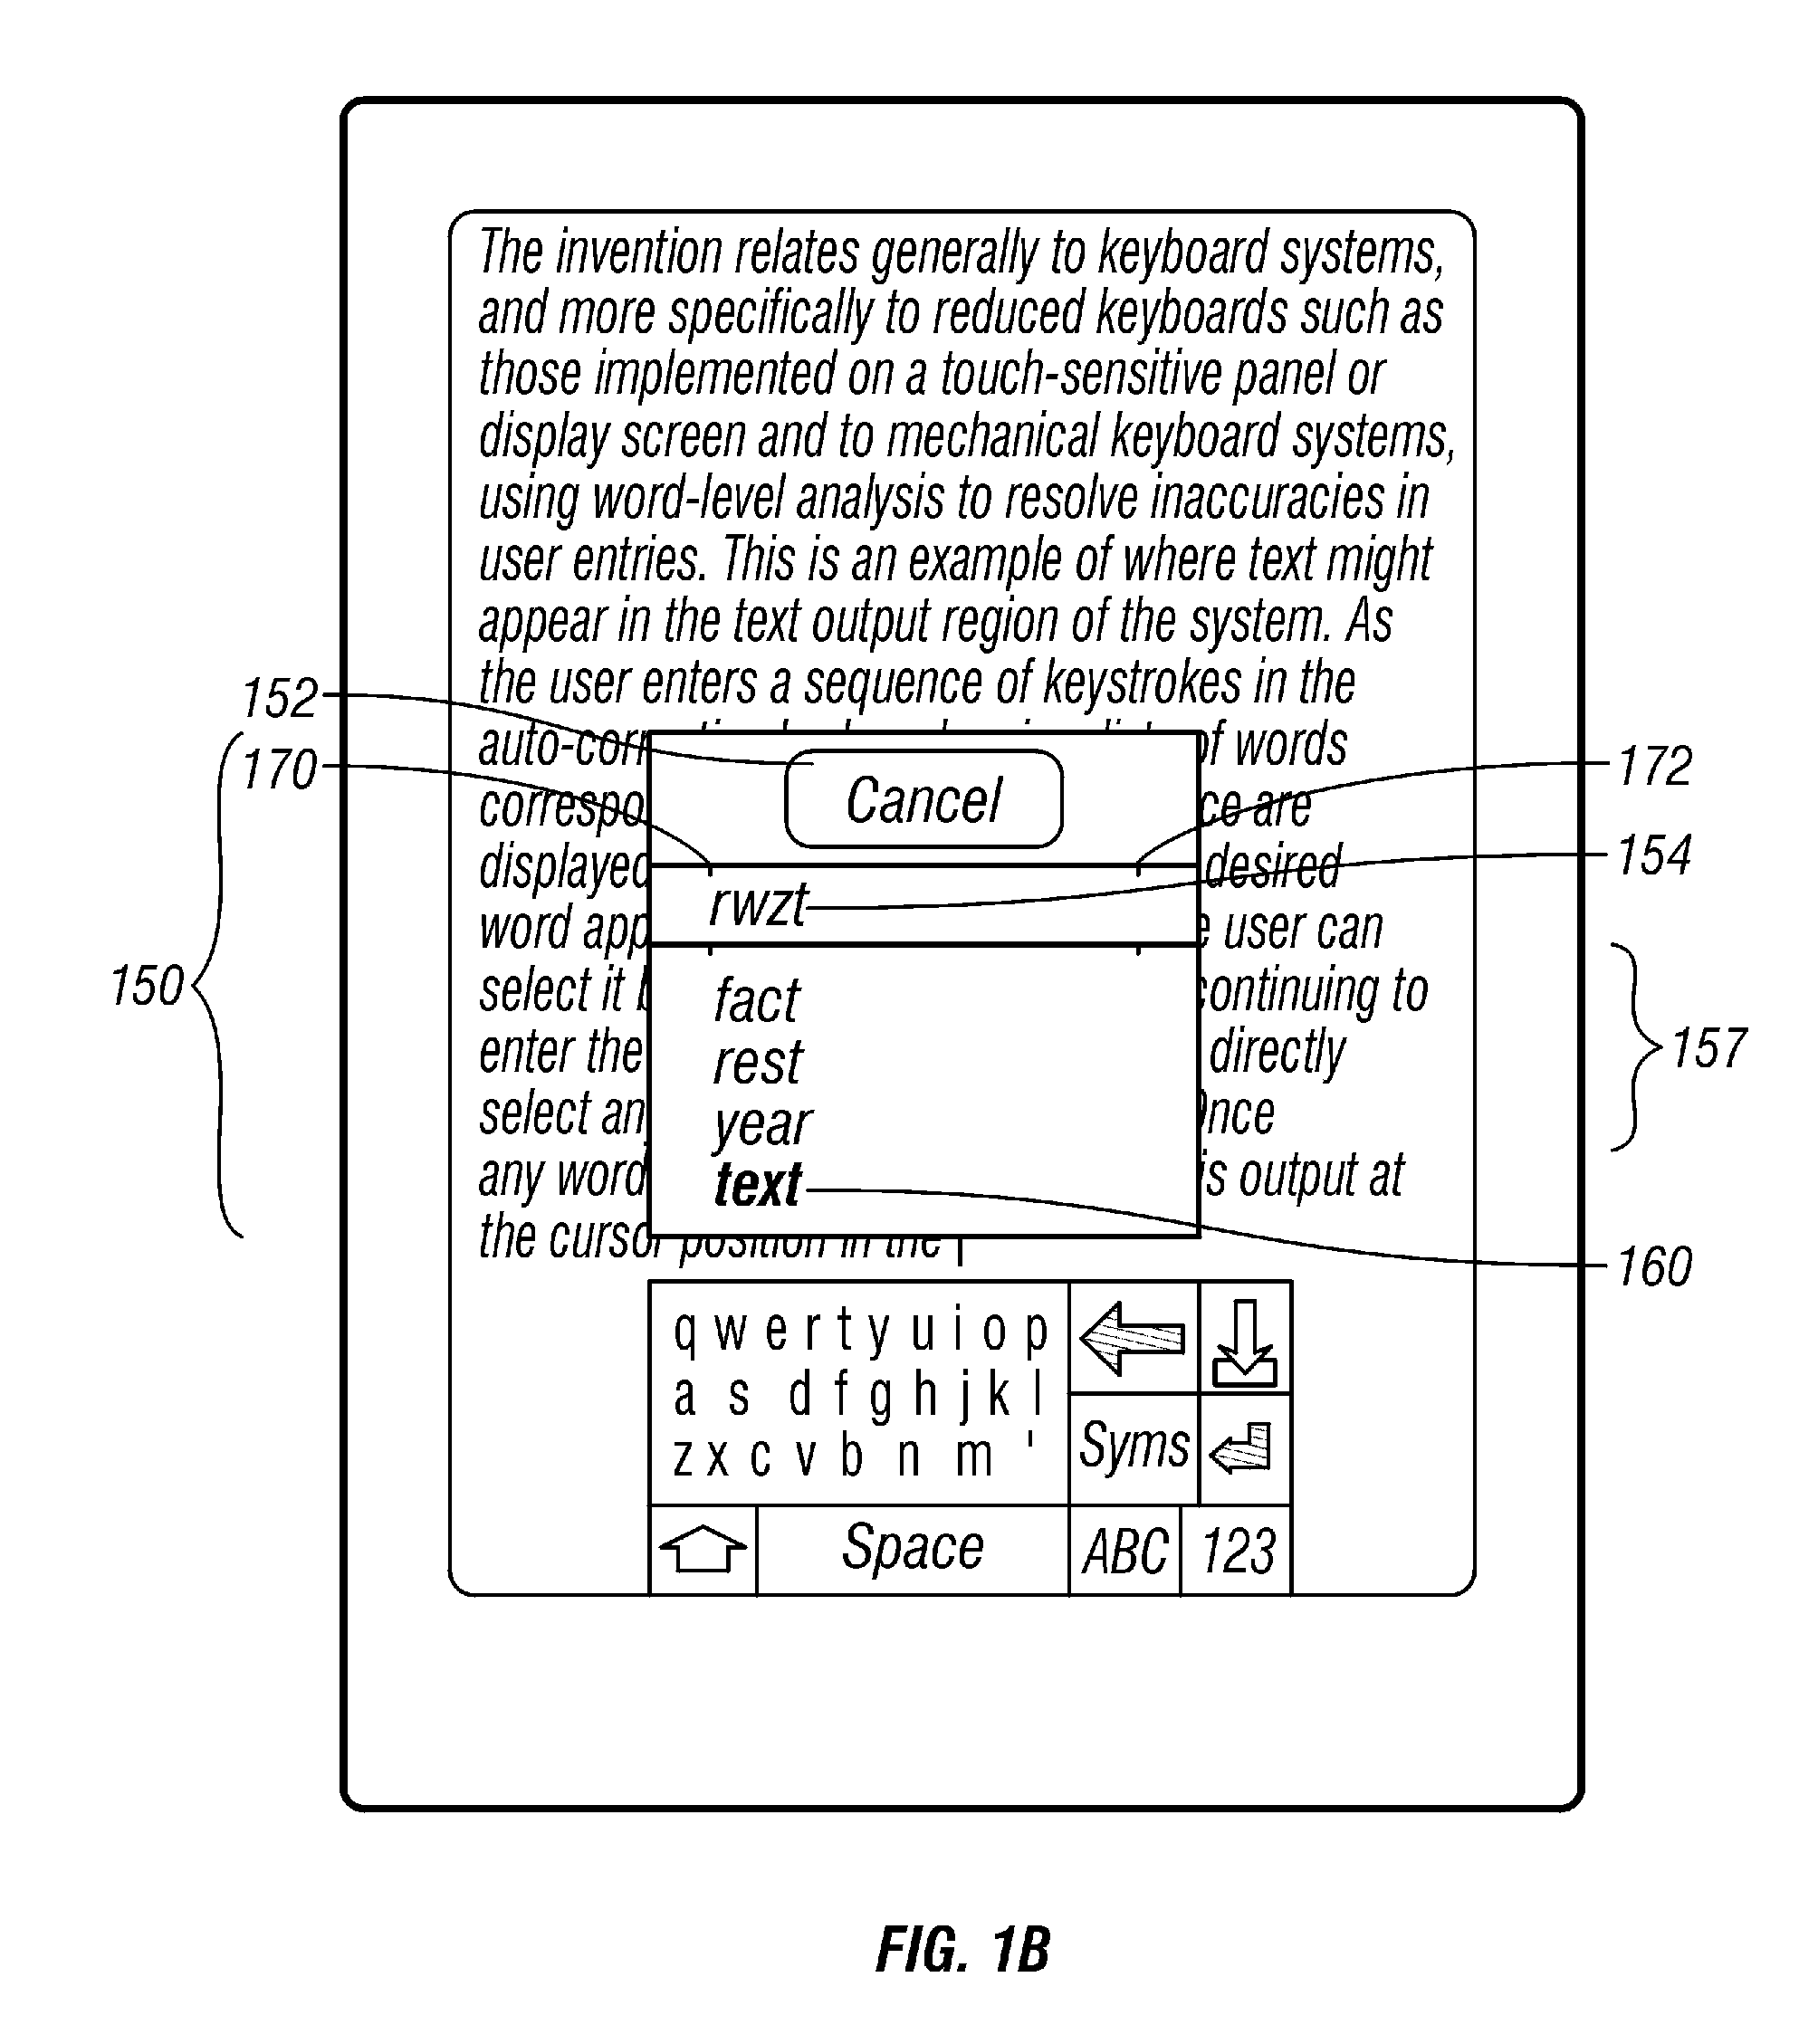 Virtual Keyboard Systems with Automatic Correction